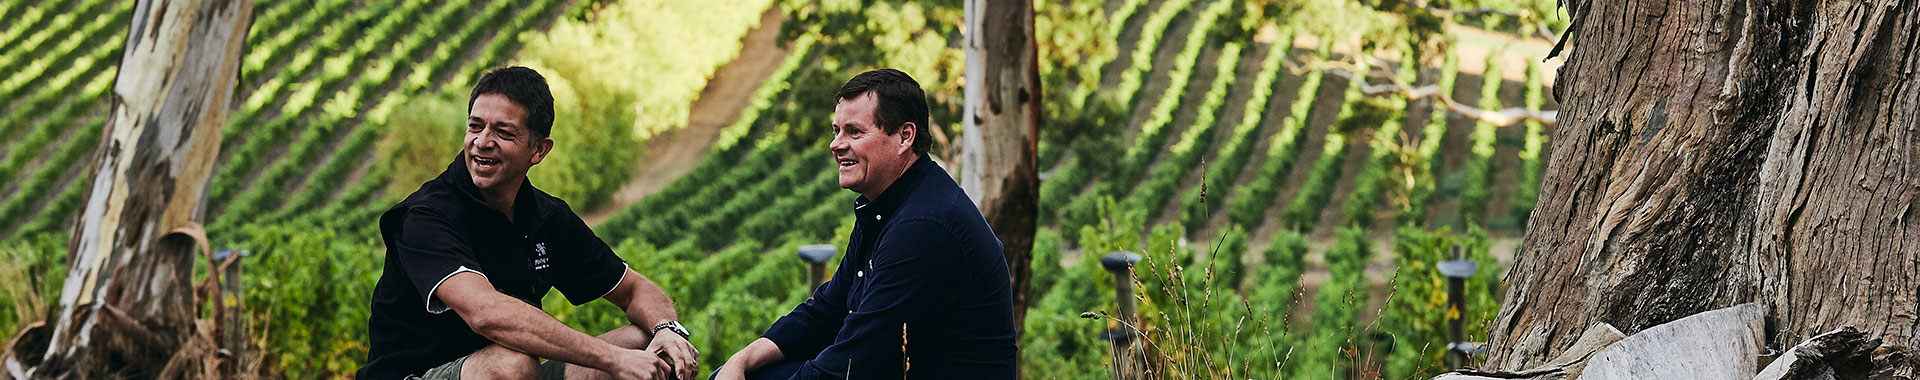 Two Men sitting in a vineyard talking and smiling